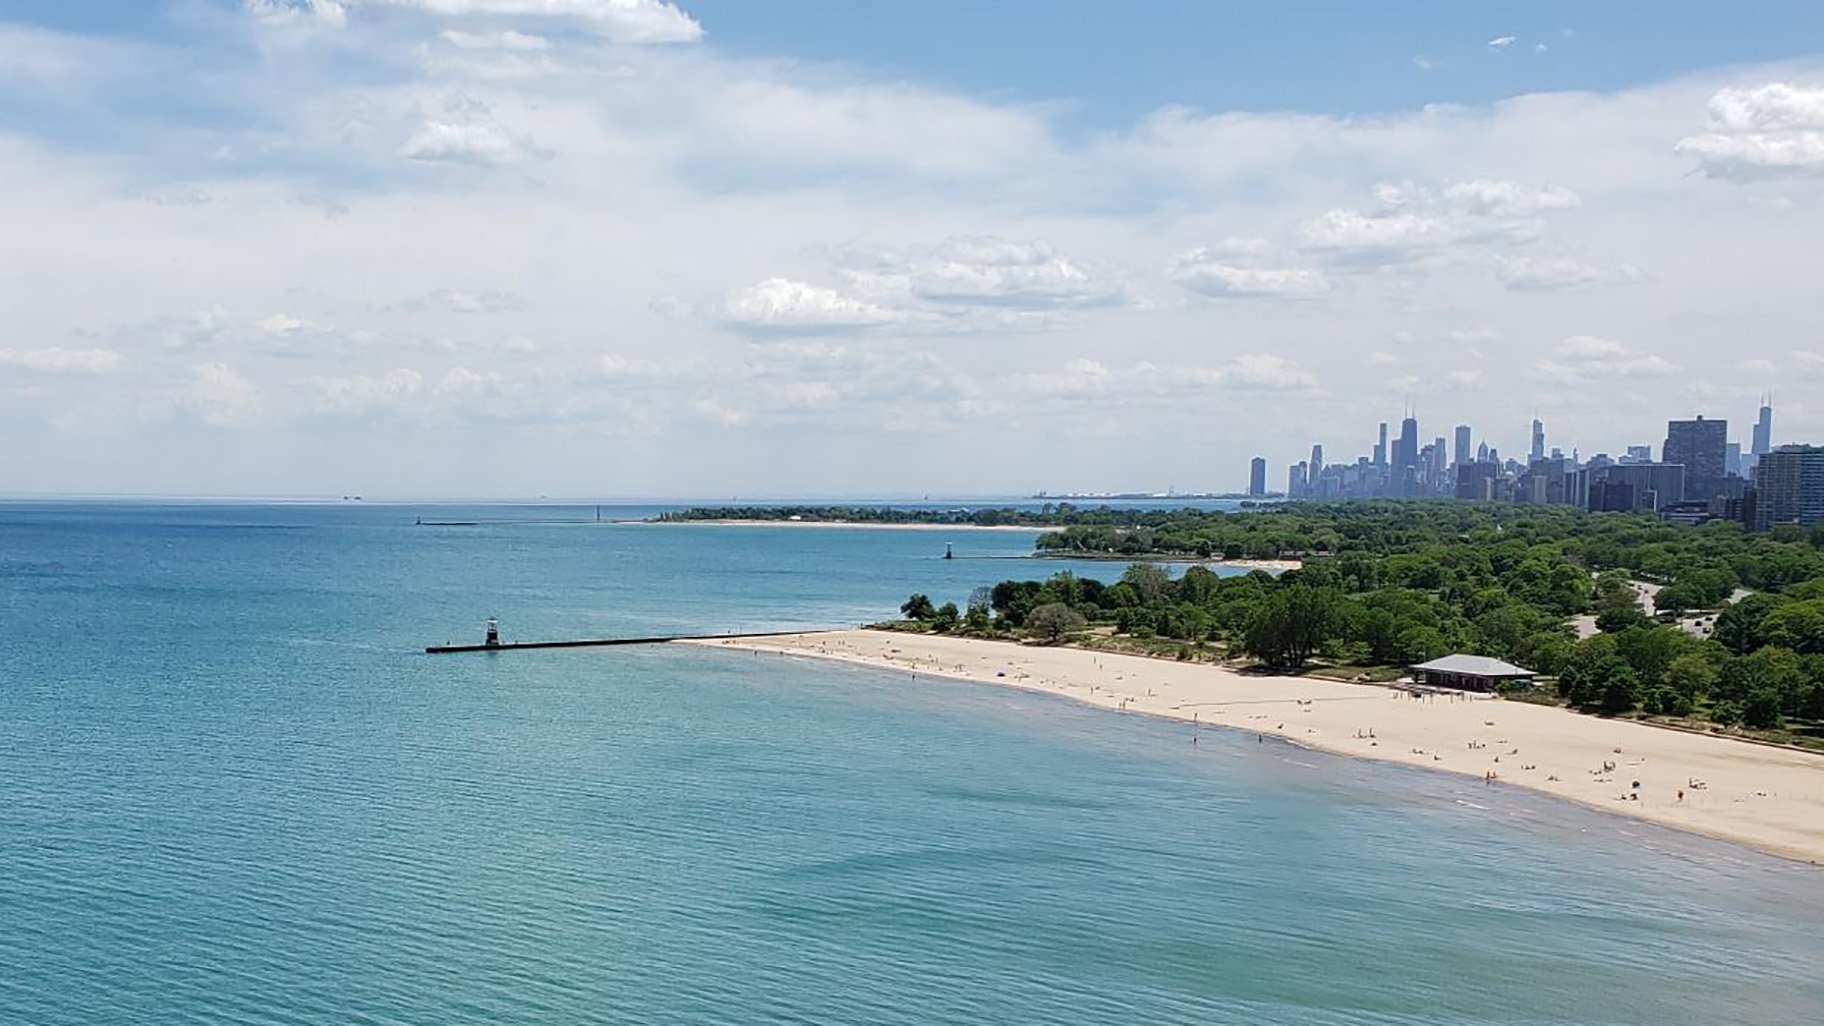 Chicago Beaches  Guide to Local Beaches on Lake Michigan